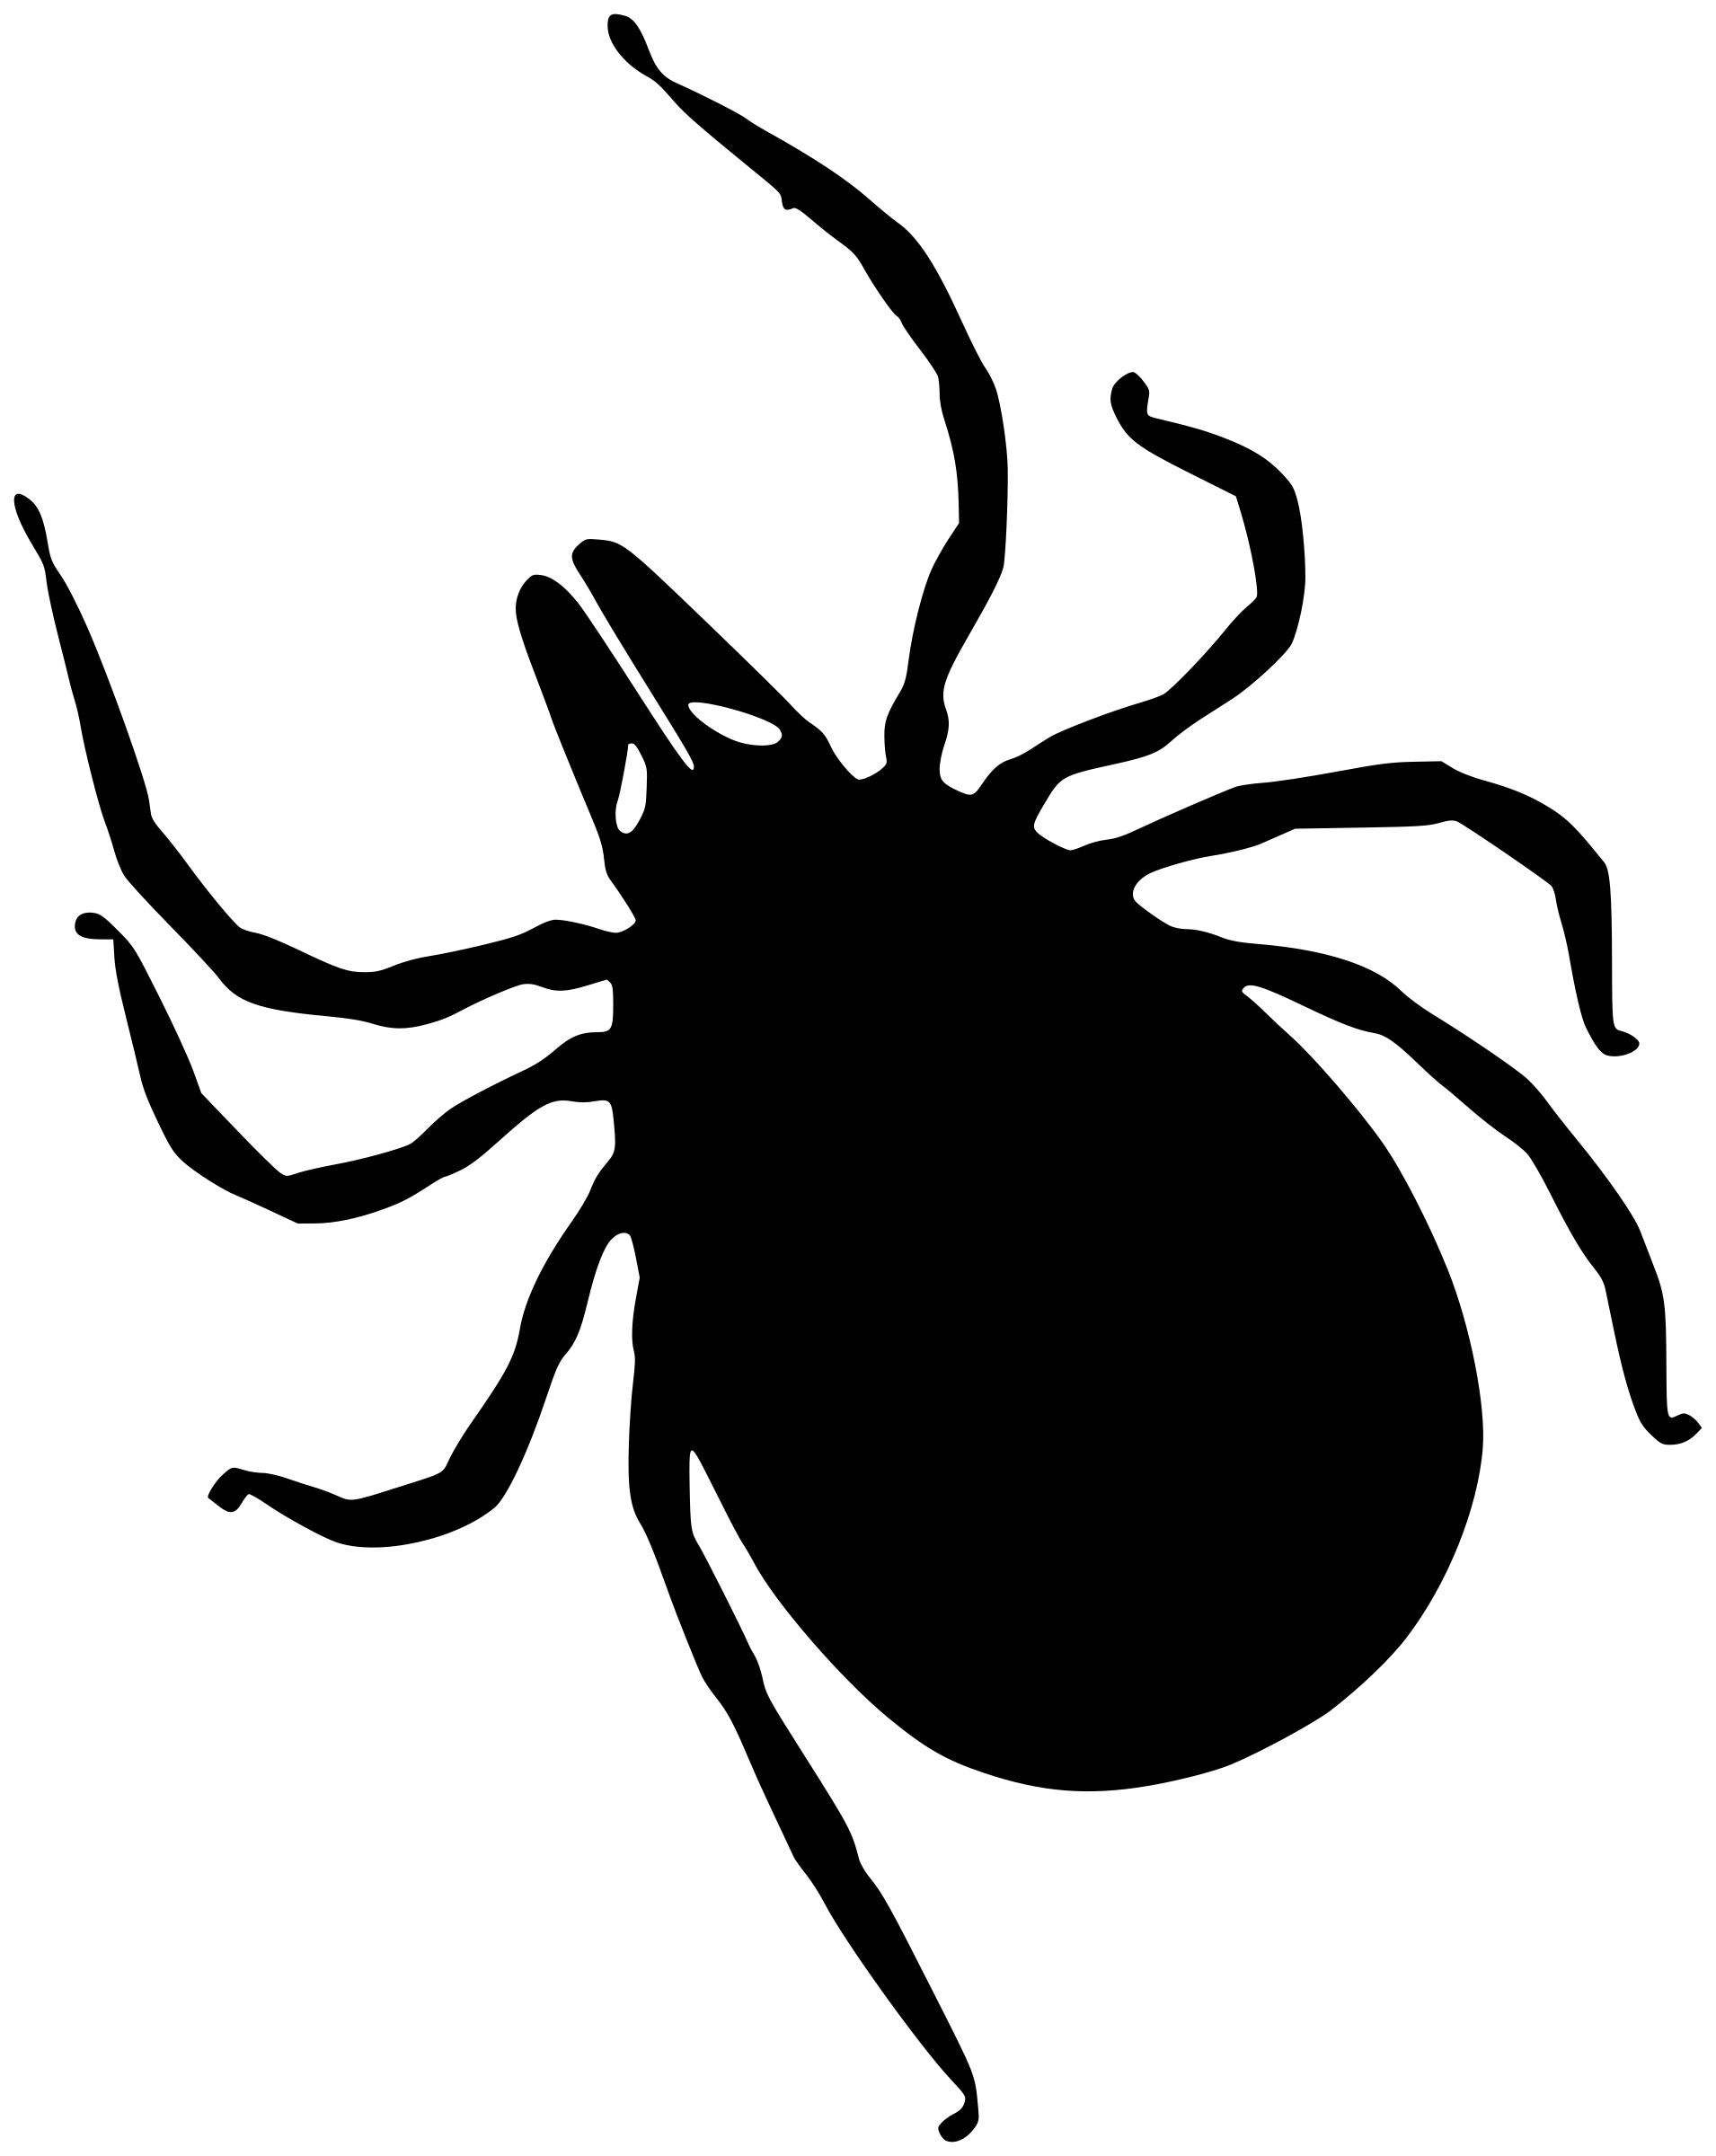 The Tick Project: Testing Environmental Interventions to Prevent Tick-borne Diseases